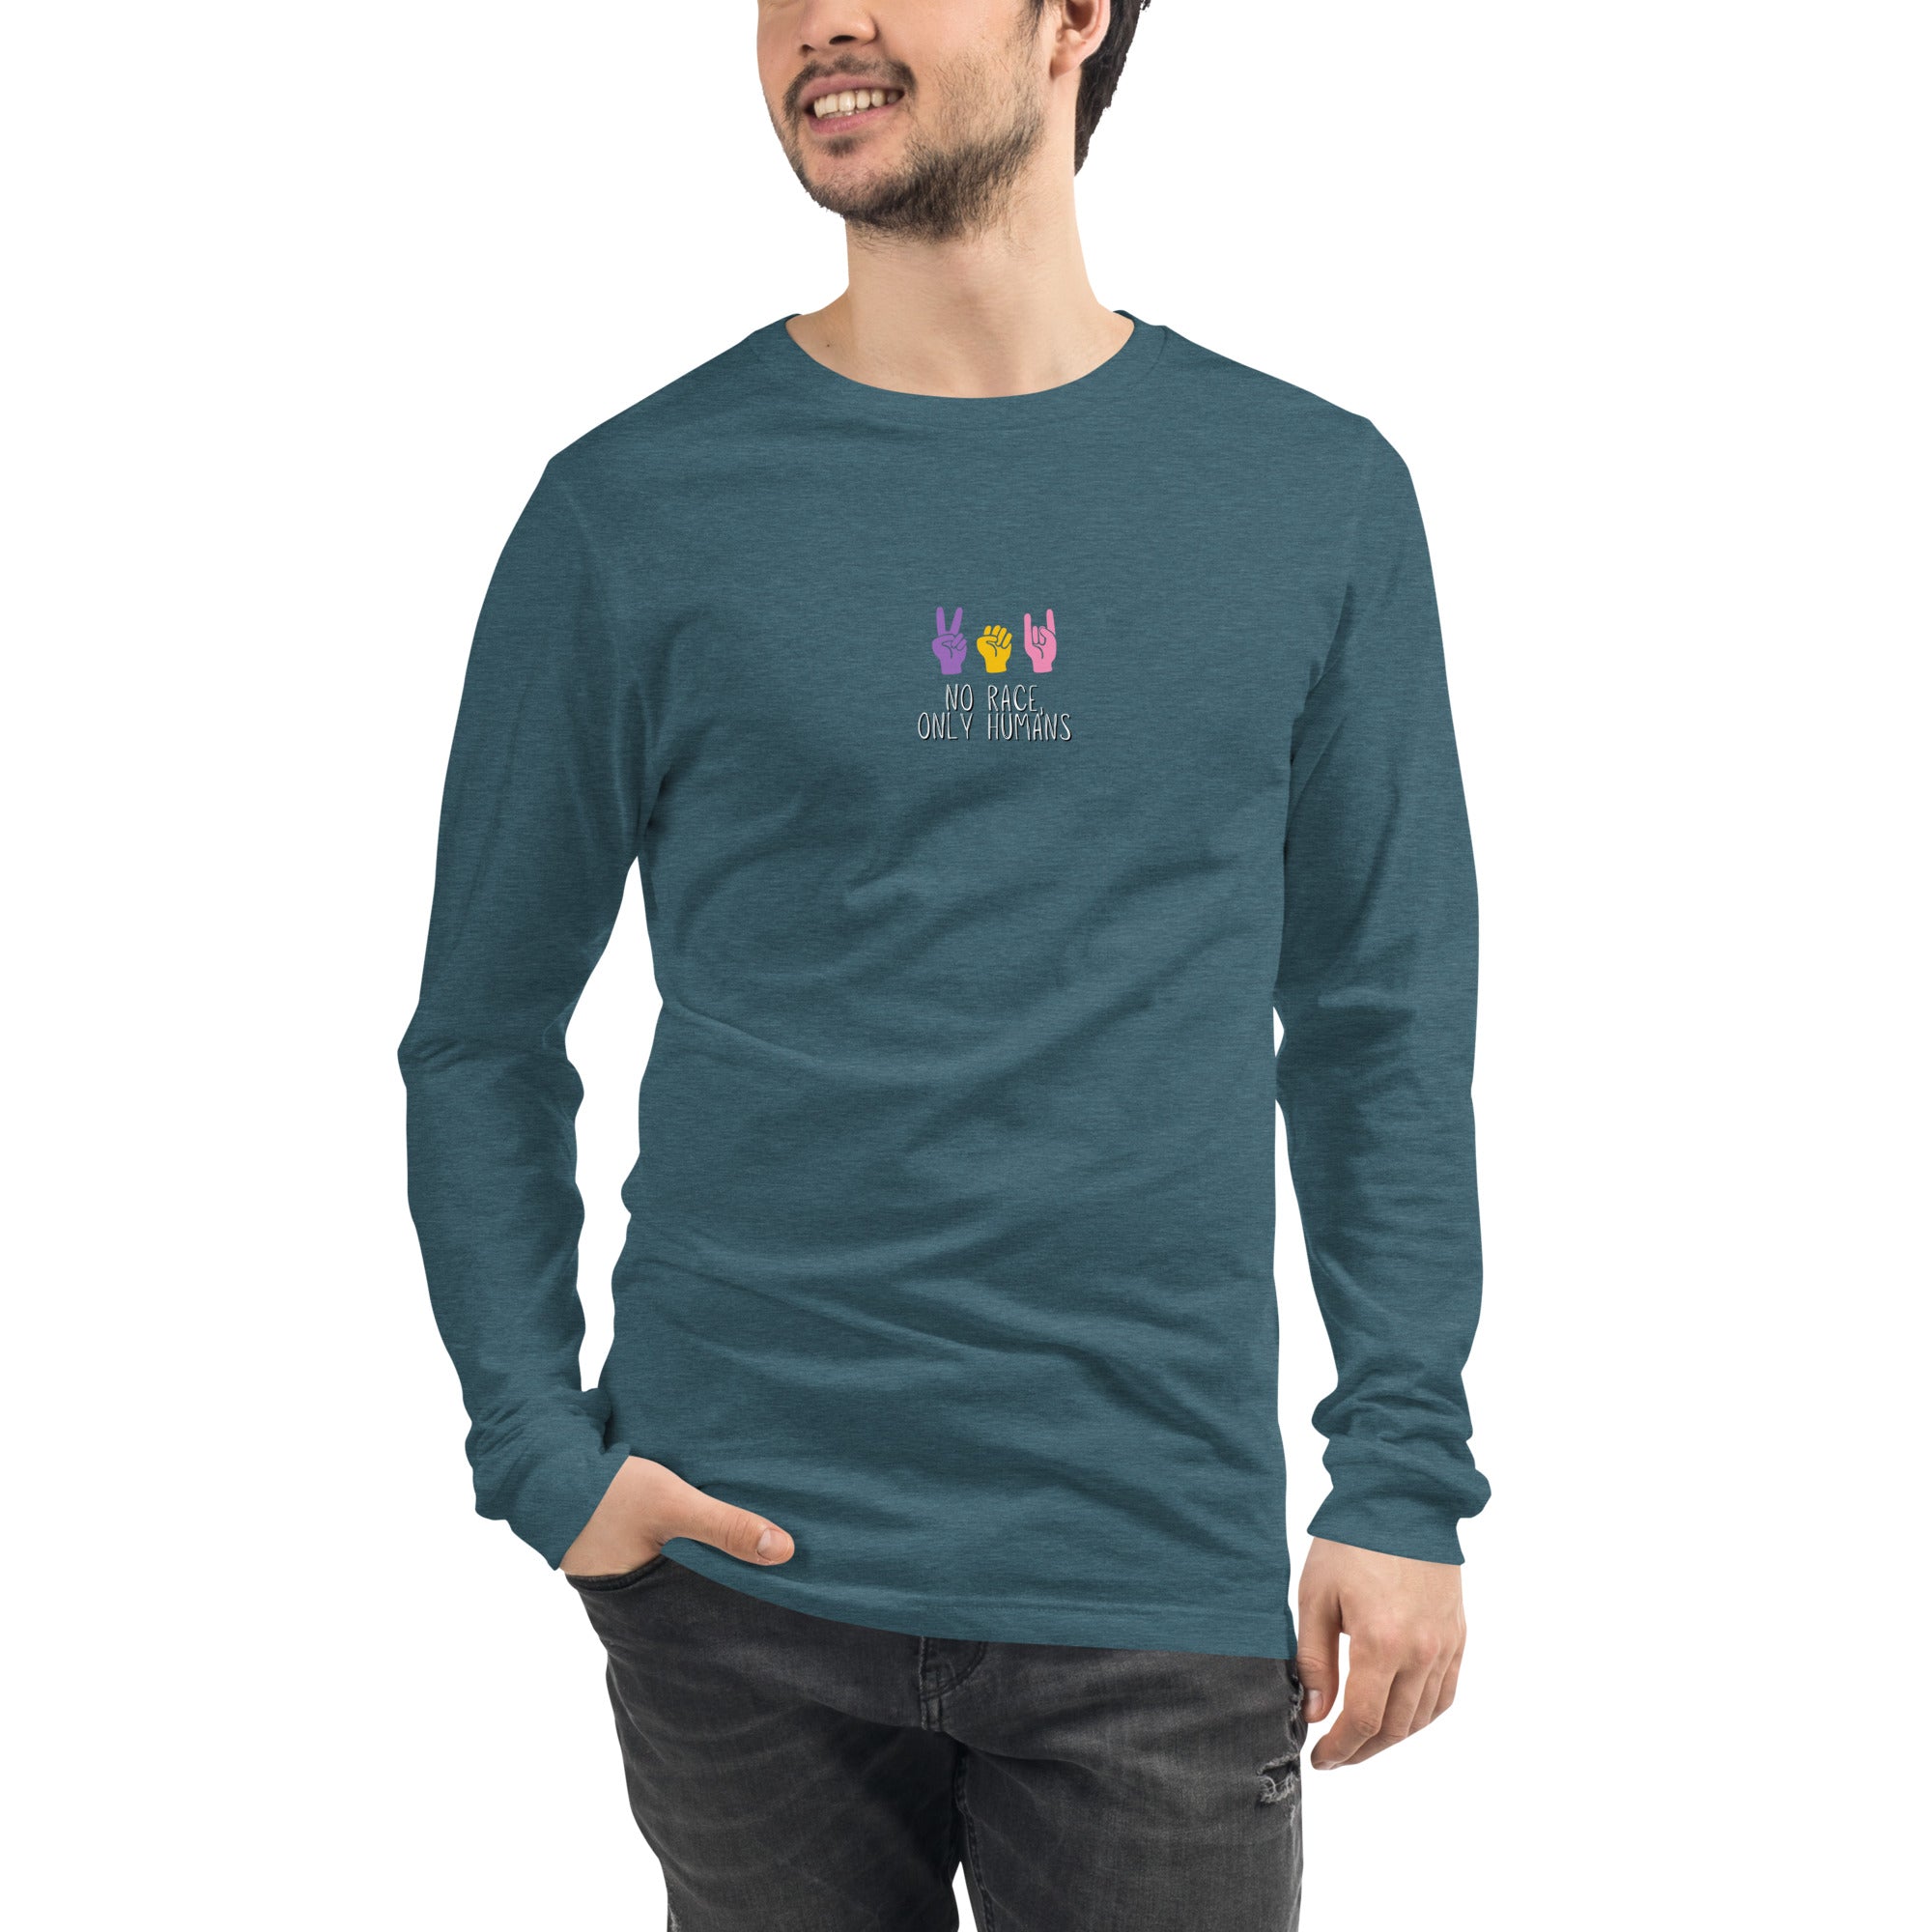 No Race Only Humans Unisex Long Sleeve Tee | Equality T-Shirt